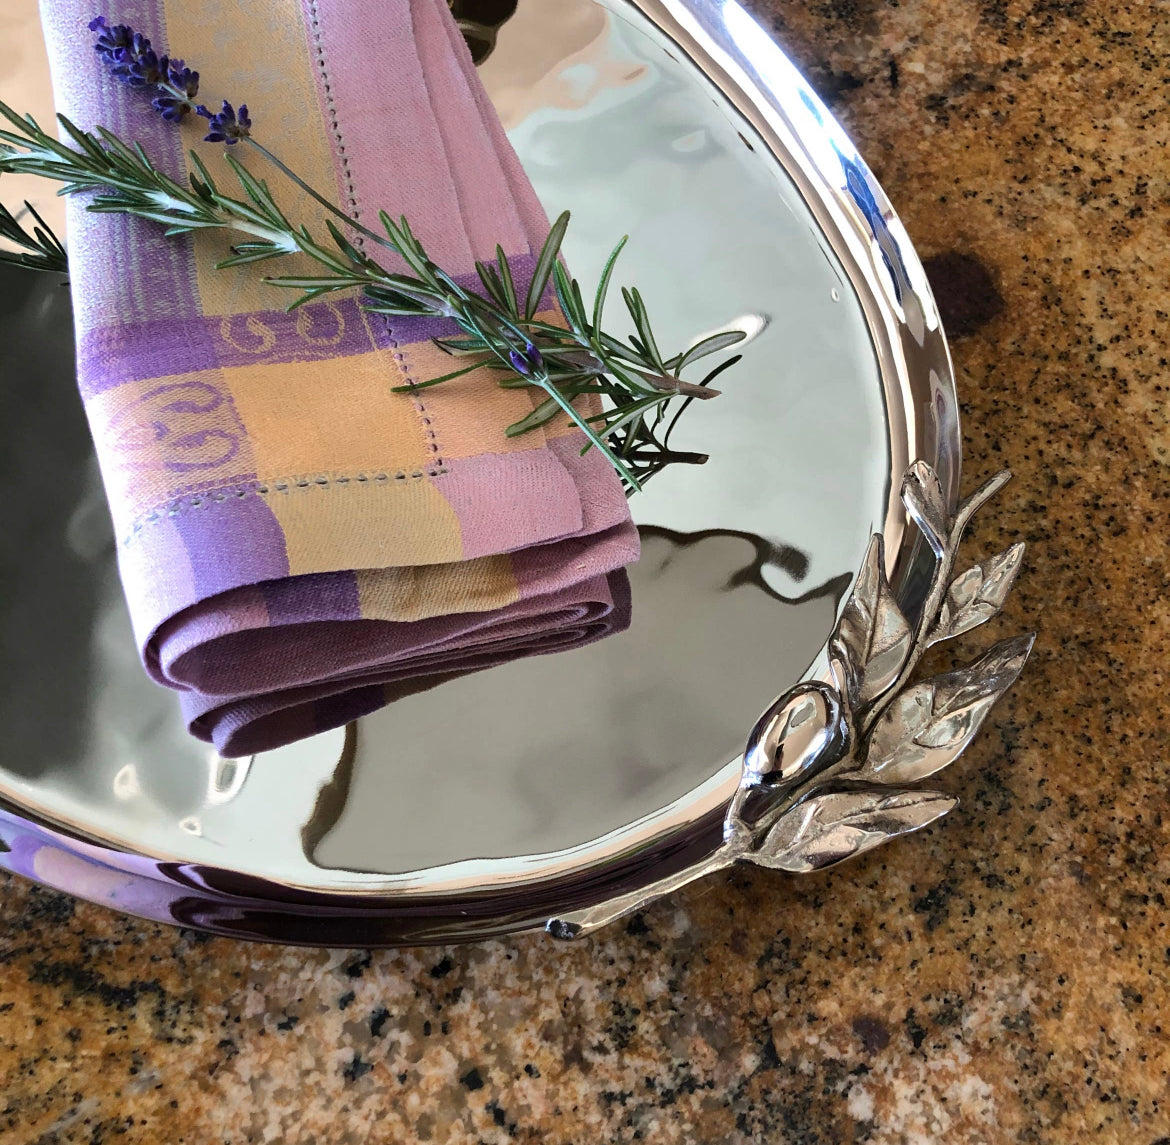 23 inch Stainless Steel Centerpiece Serving Tray with hammered textures and olive leaf designs on the edges.